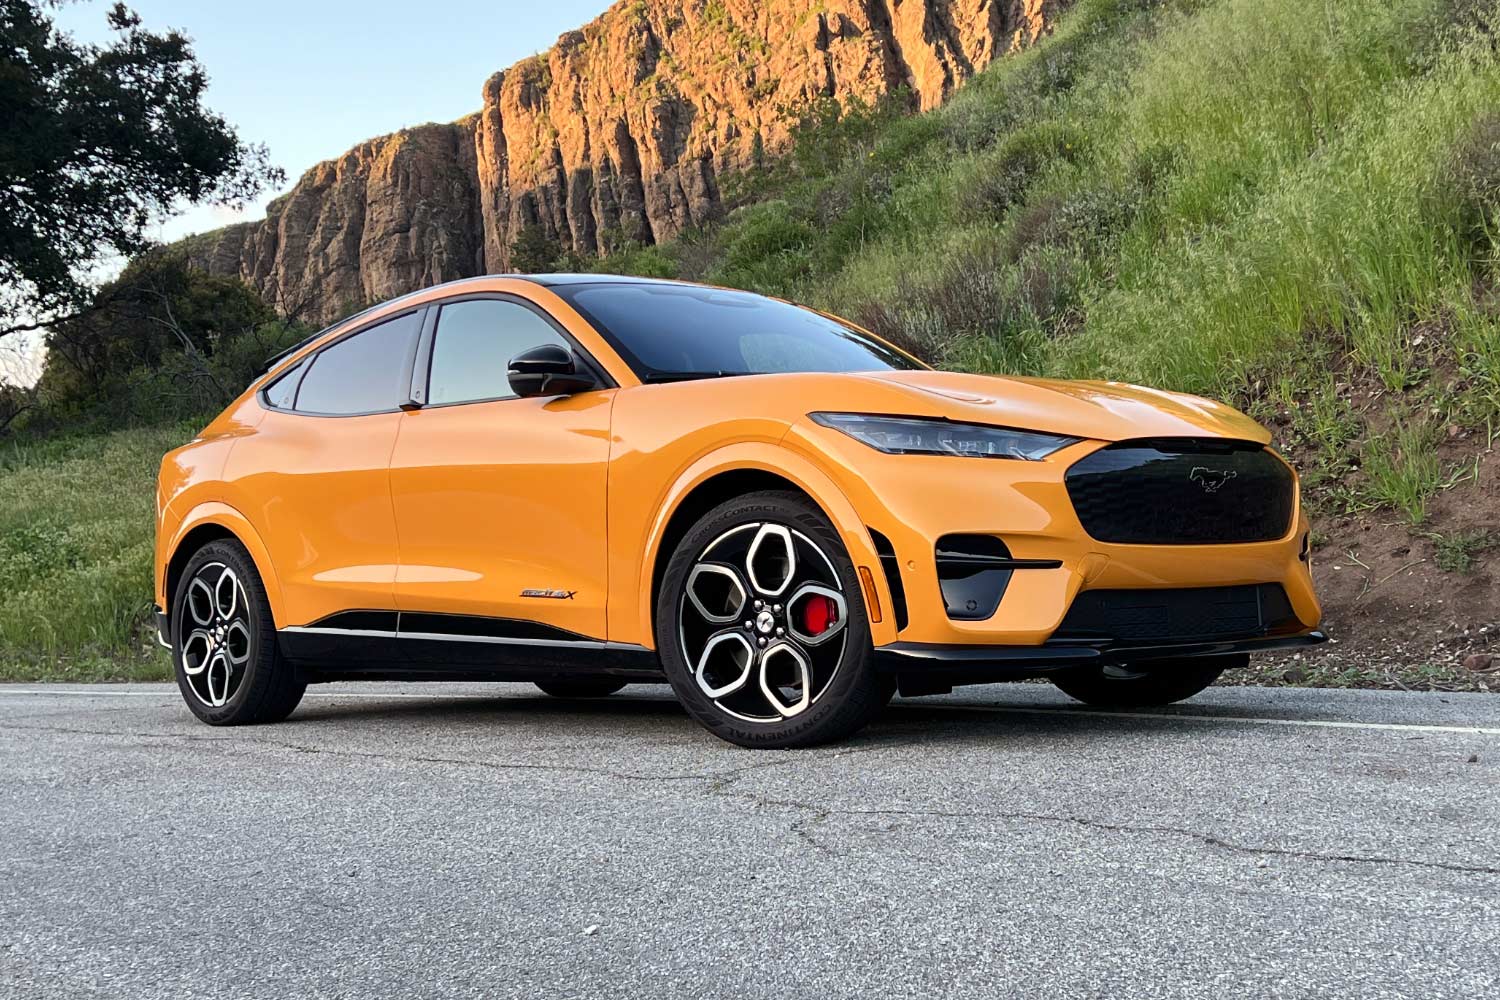 2023 Ford Mustang Mach-E GT in Cyber Orange parked on country road